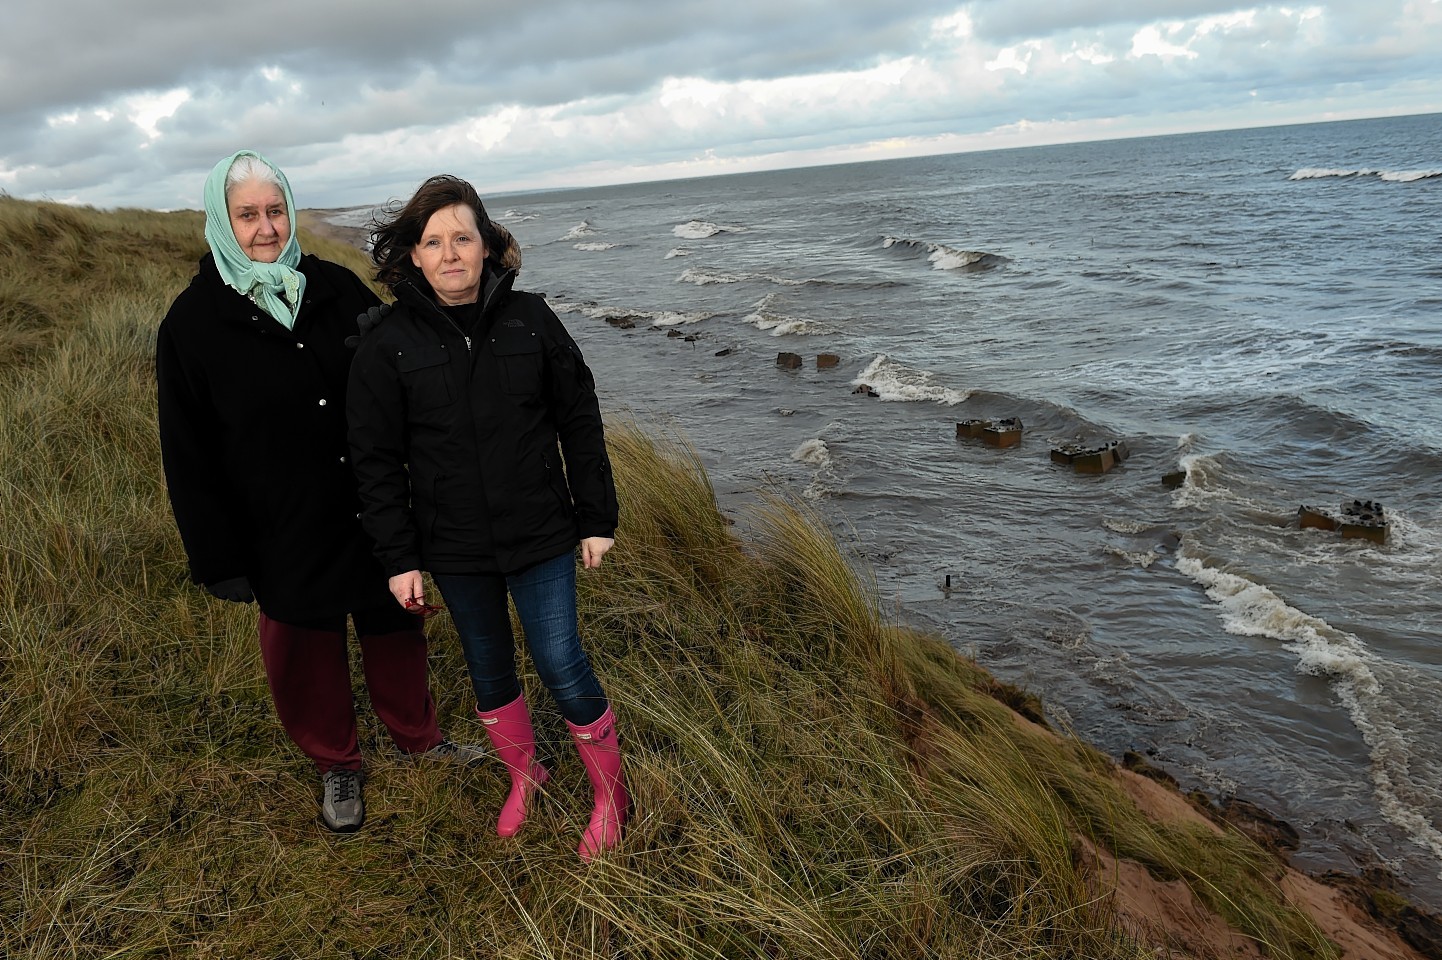 Edna Booth and Nicola Brown at the beach near the oil spill. Picture by Kenny Elrick 